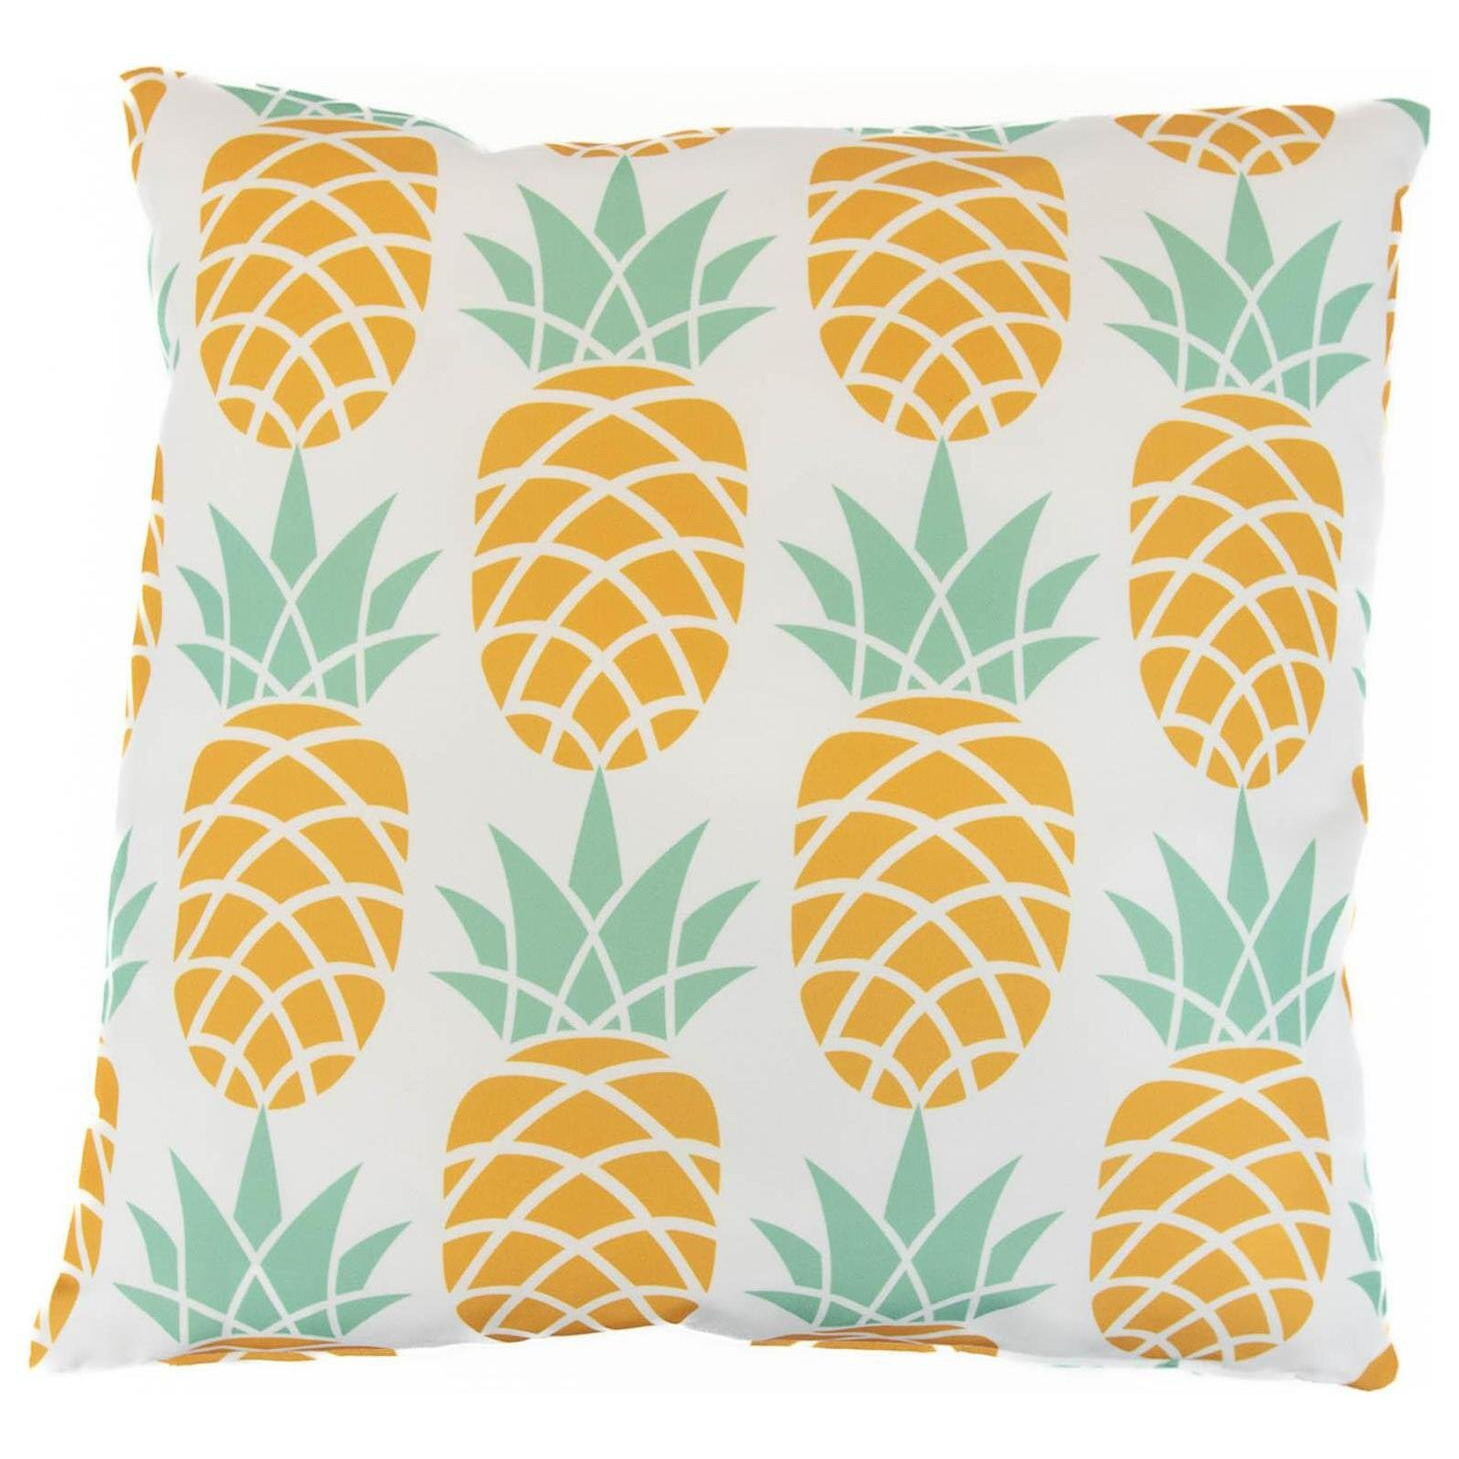 Streetwize Pineapple Printed Outdoor Cushion - Pack Of 4 - image 1